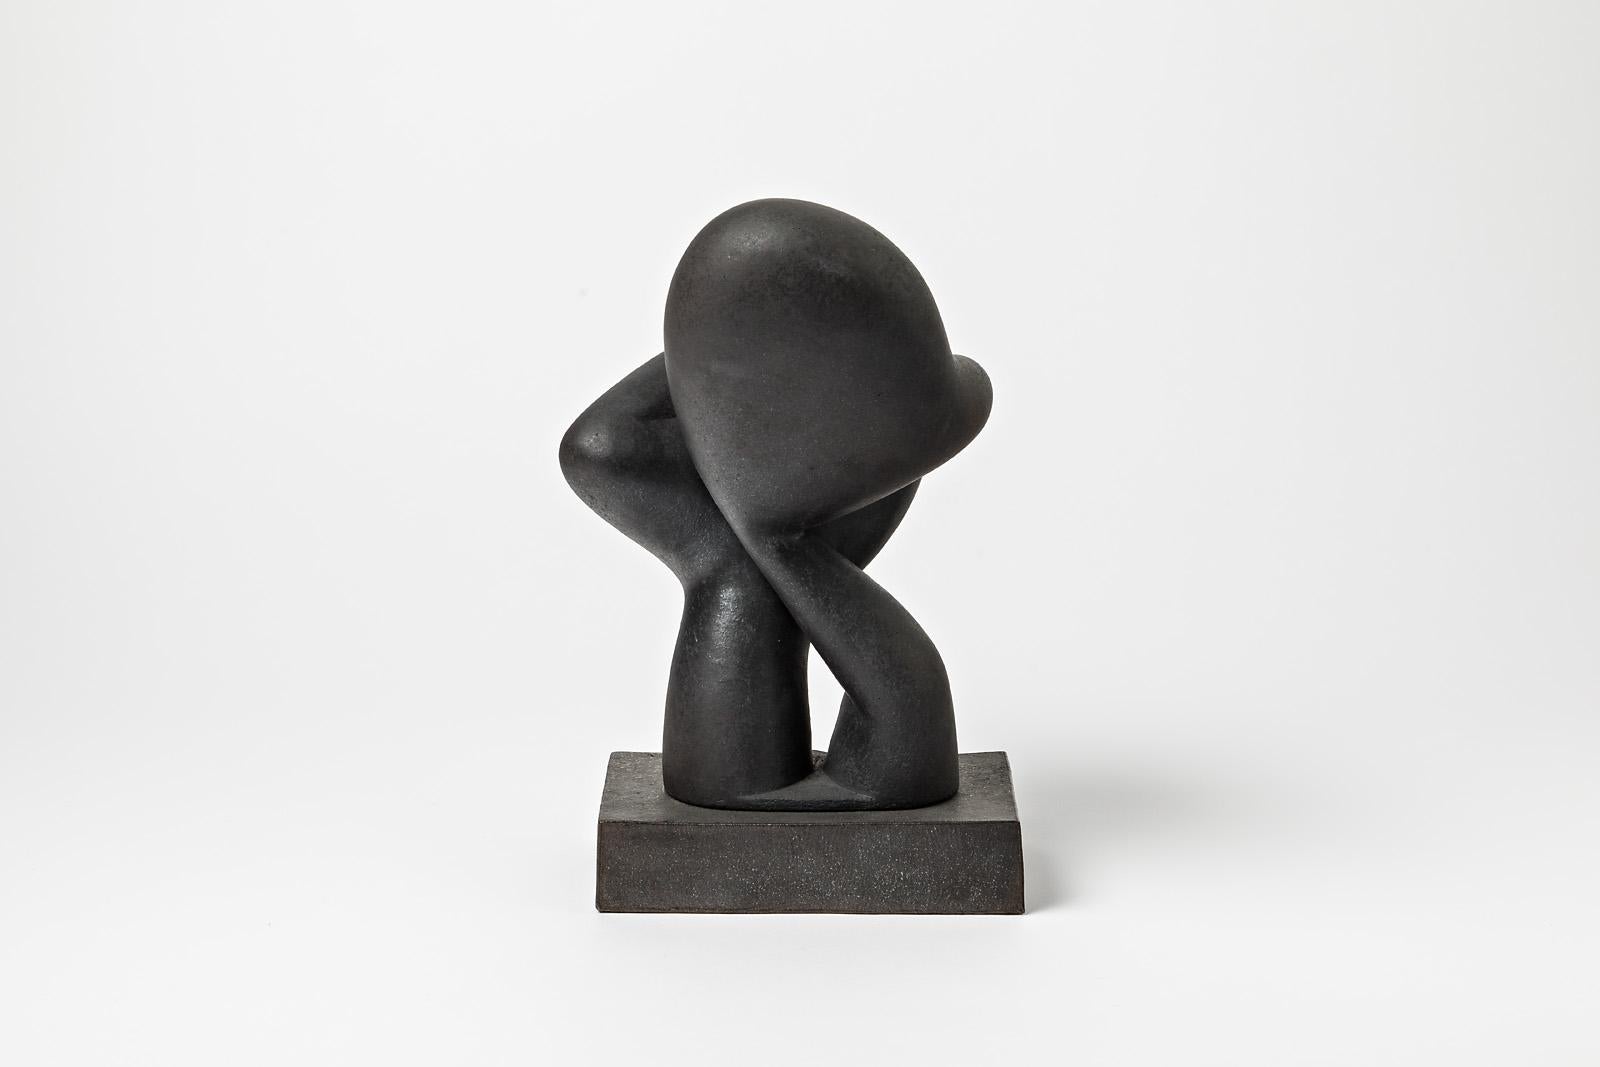 An unique ceramic sculpture with black glaze decoration by Pierre Martinon.
Perfect original conditions.
Signed at the base 